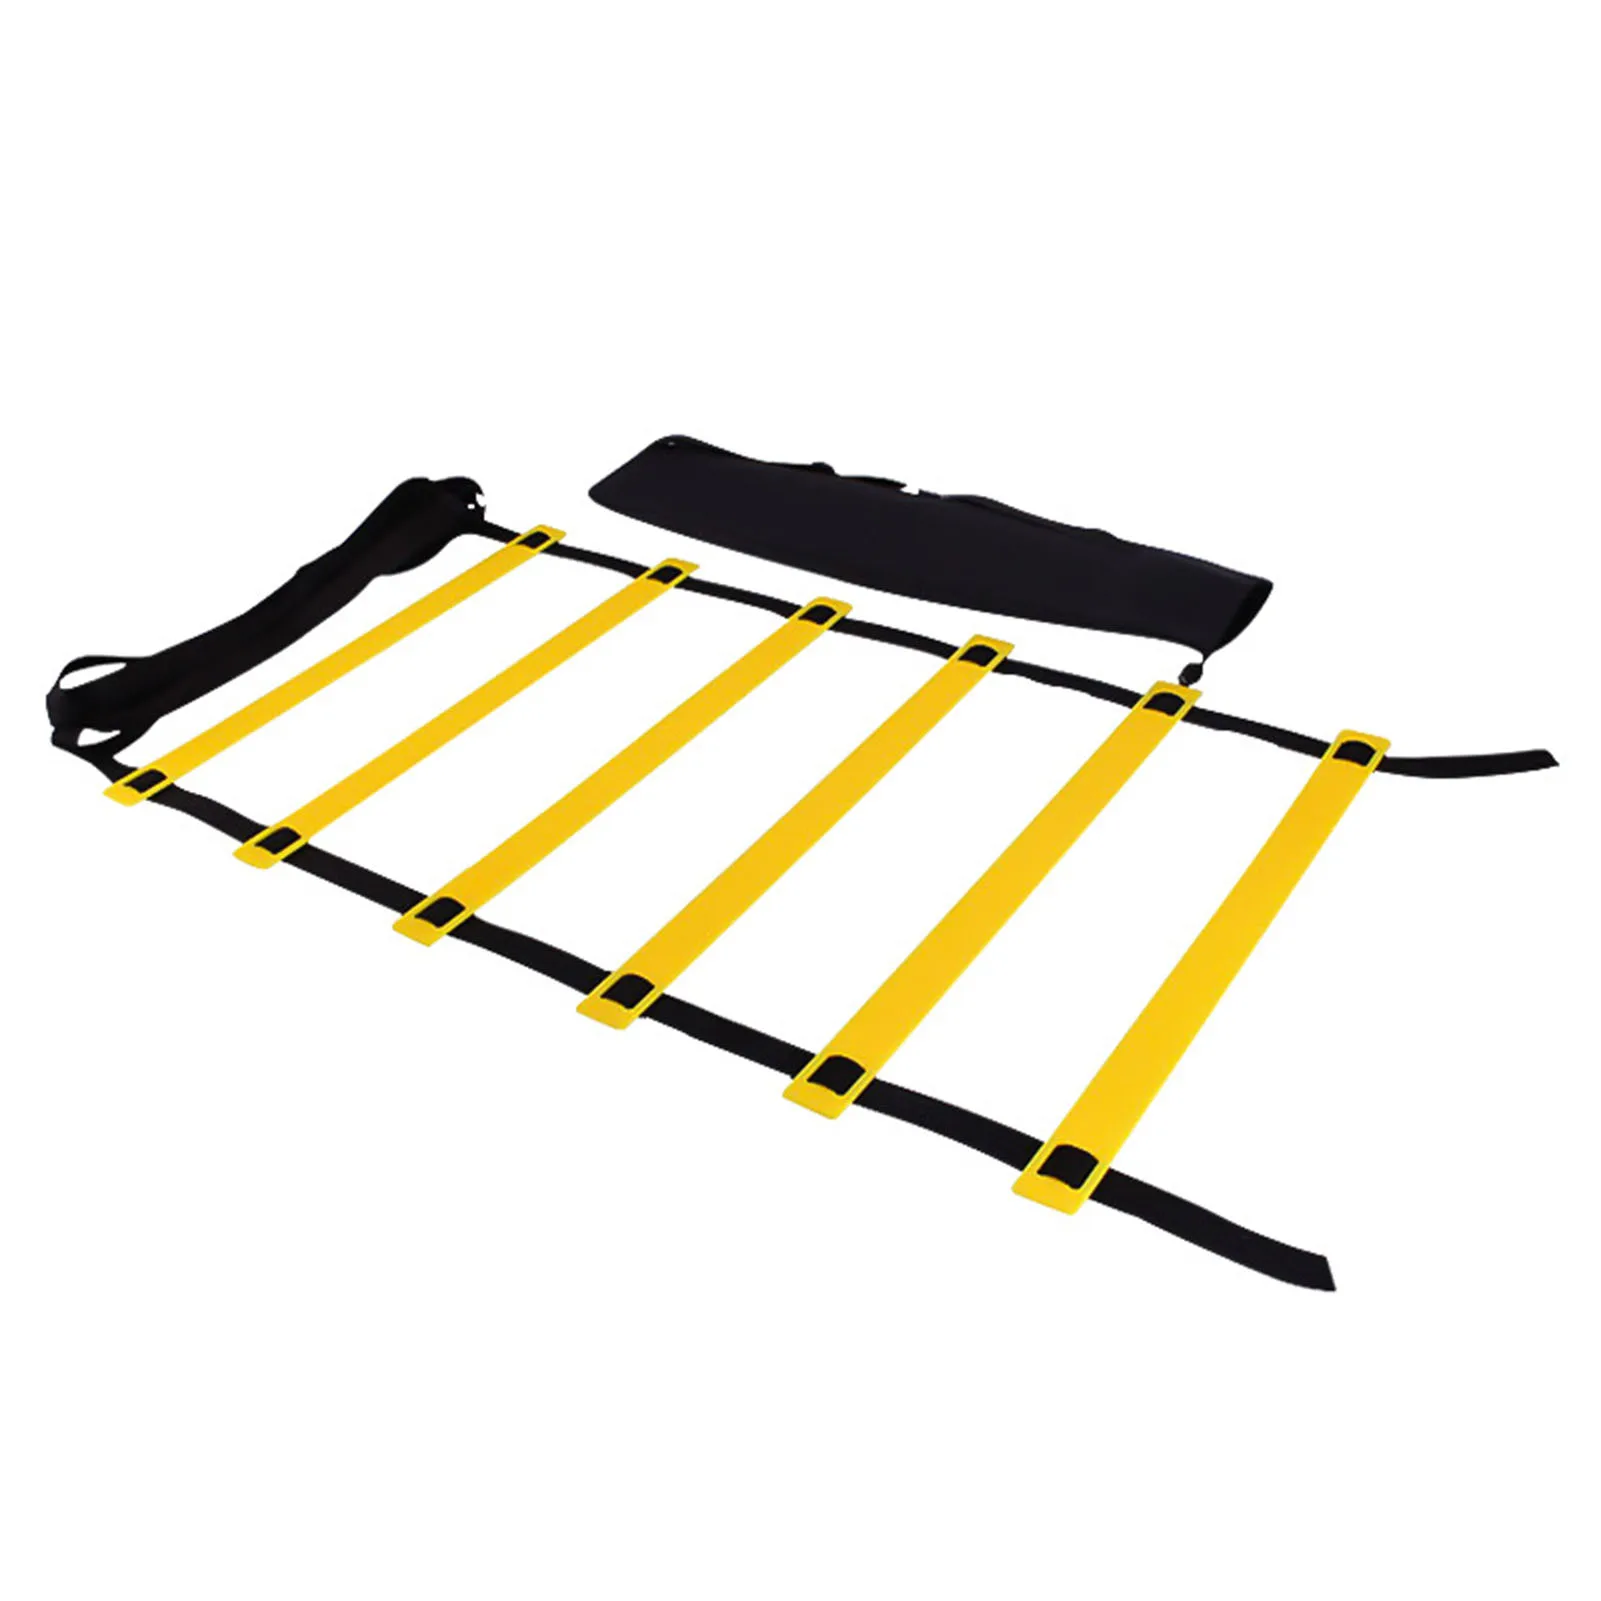 Step Speed Training Soft Ladder Foldable Adjustable Rungs Agility Ladder for Versatile Speed Fitness Training